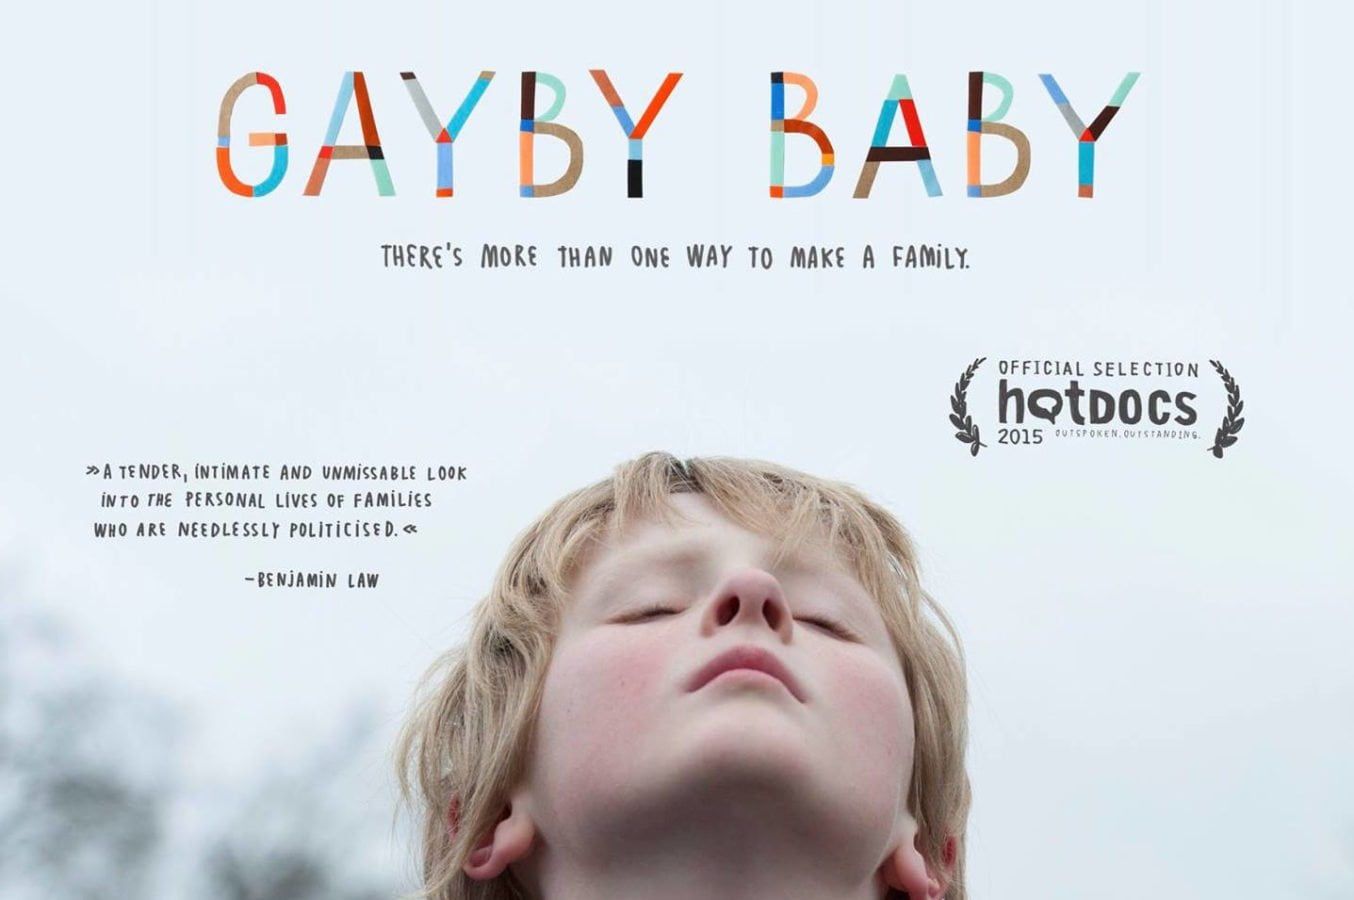 Gayby Baby Film Poster - image of a blonde boy with a light blue sky in the background, with rainbow lettering spelling out 'Gayby Baby'